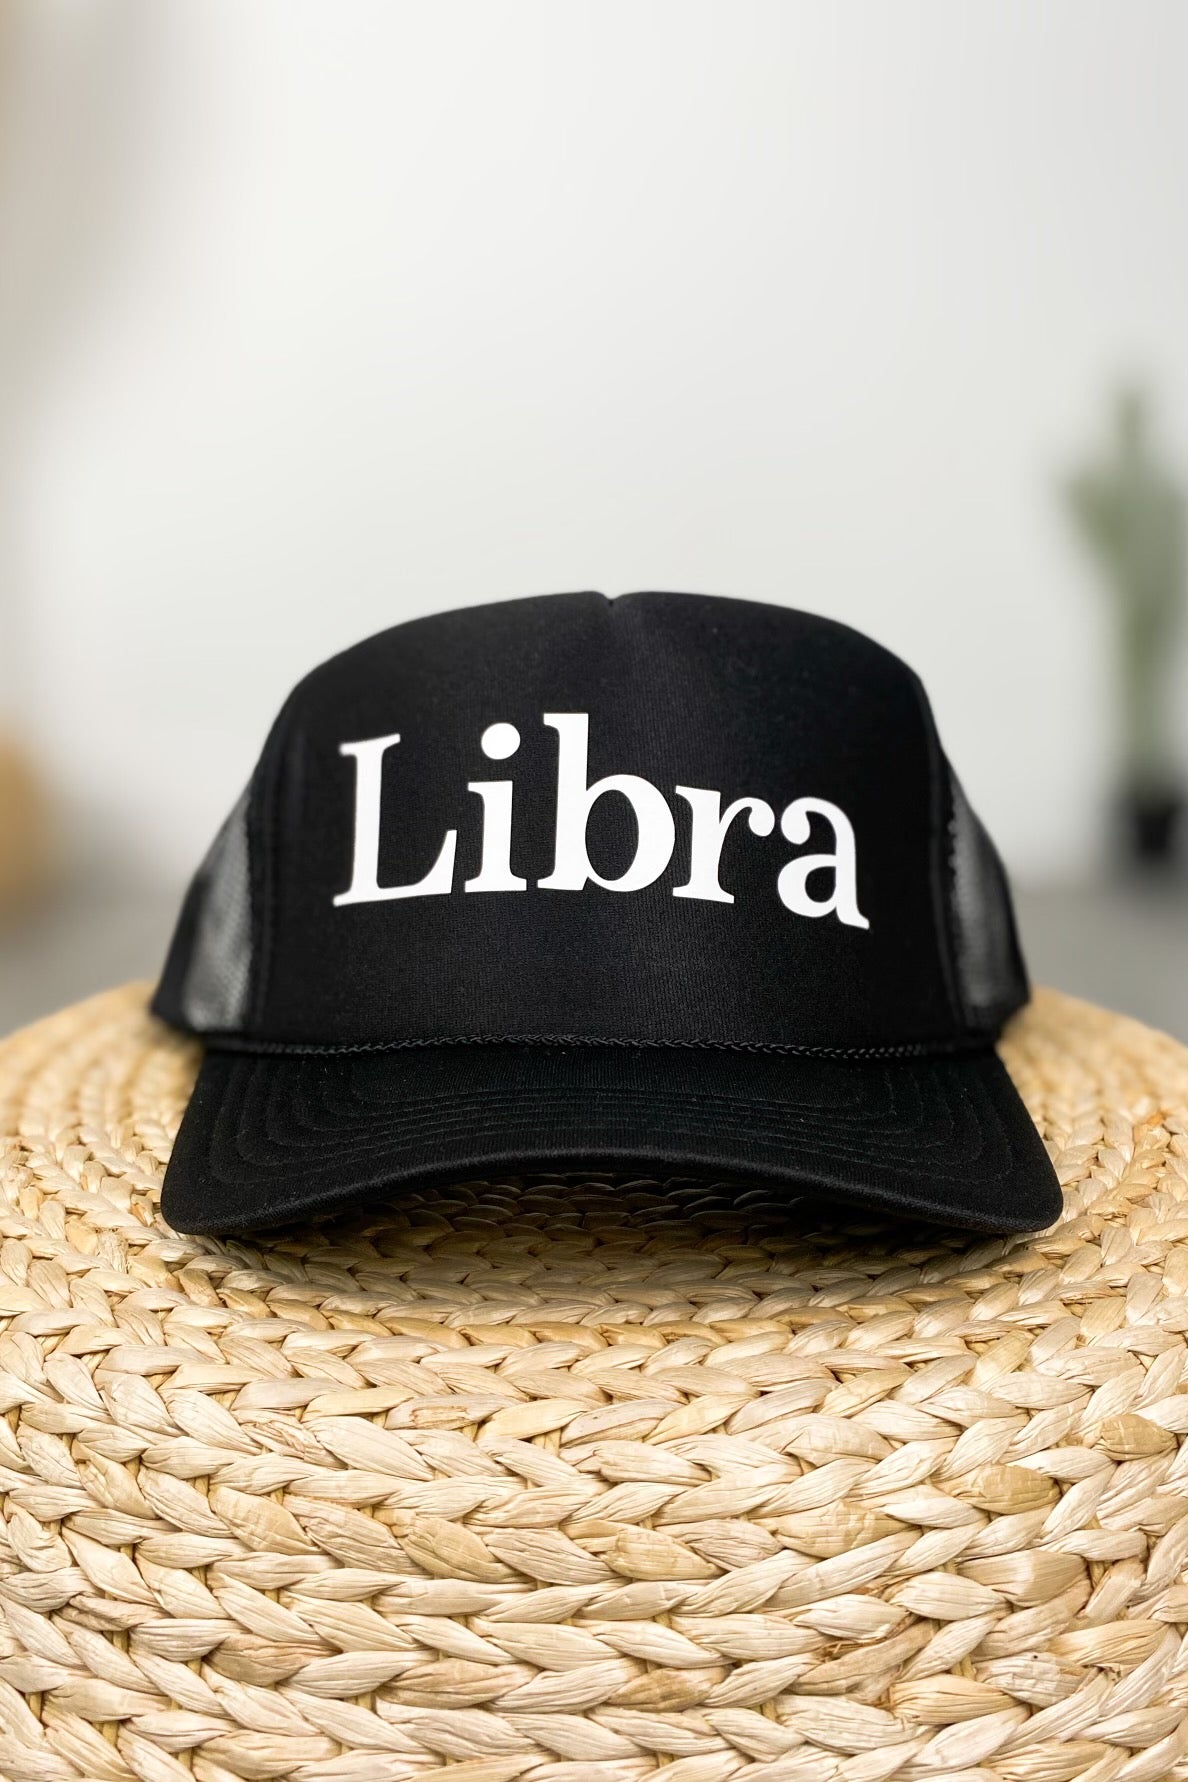 Libra trucker hat black - Trendy Hats at Lush Fashion Lounge Boutique in Oklahoma City